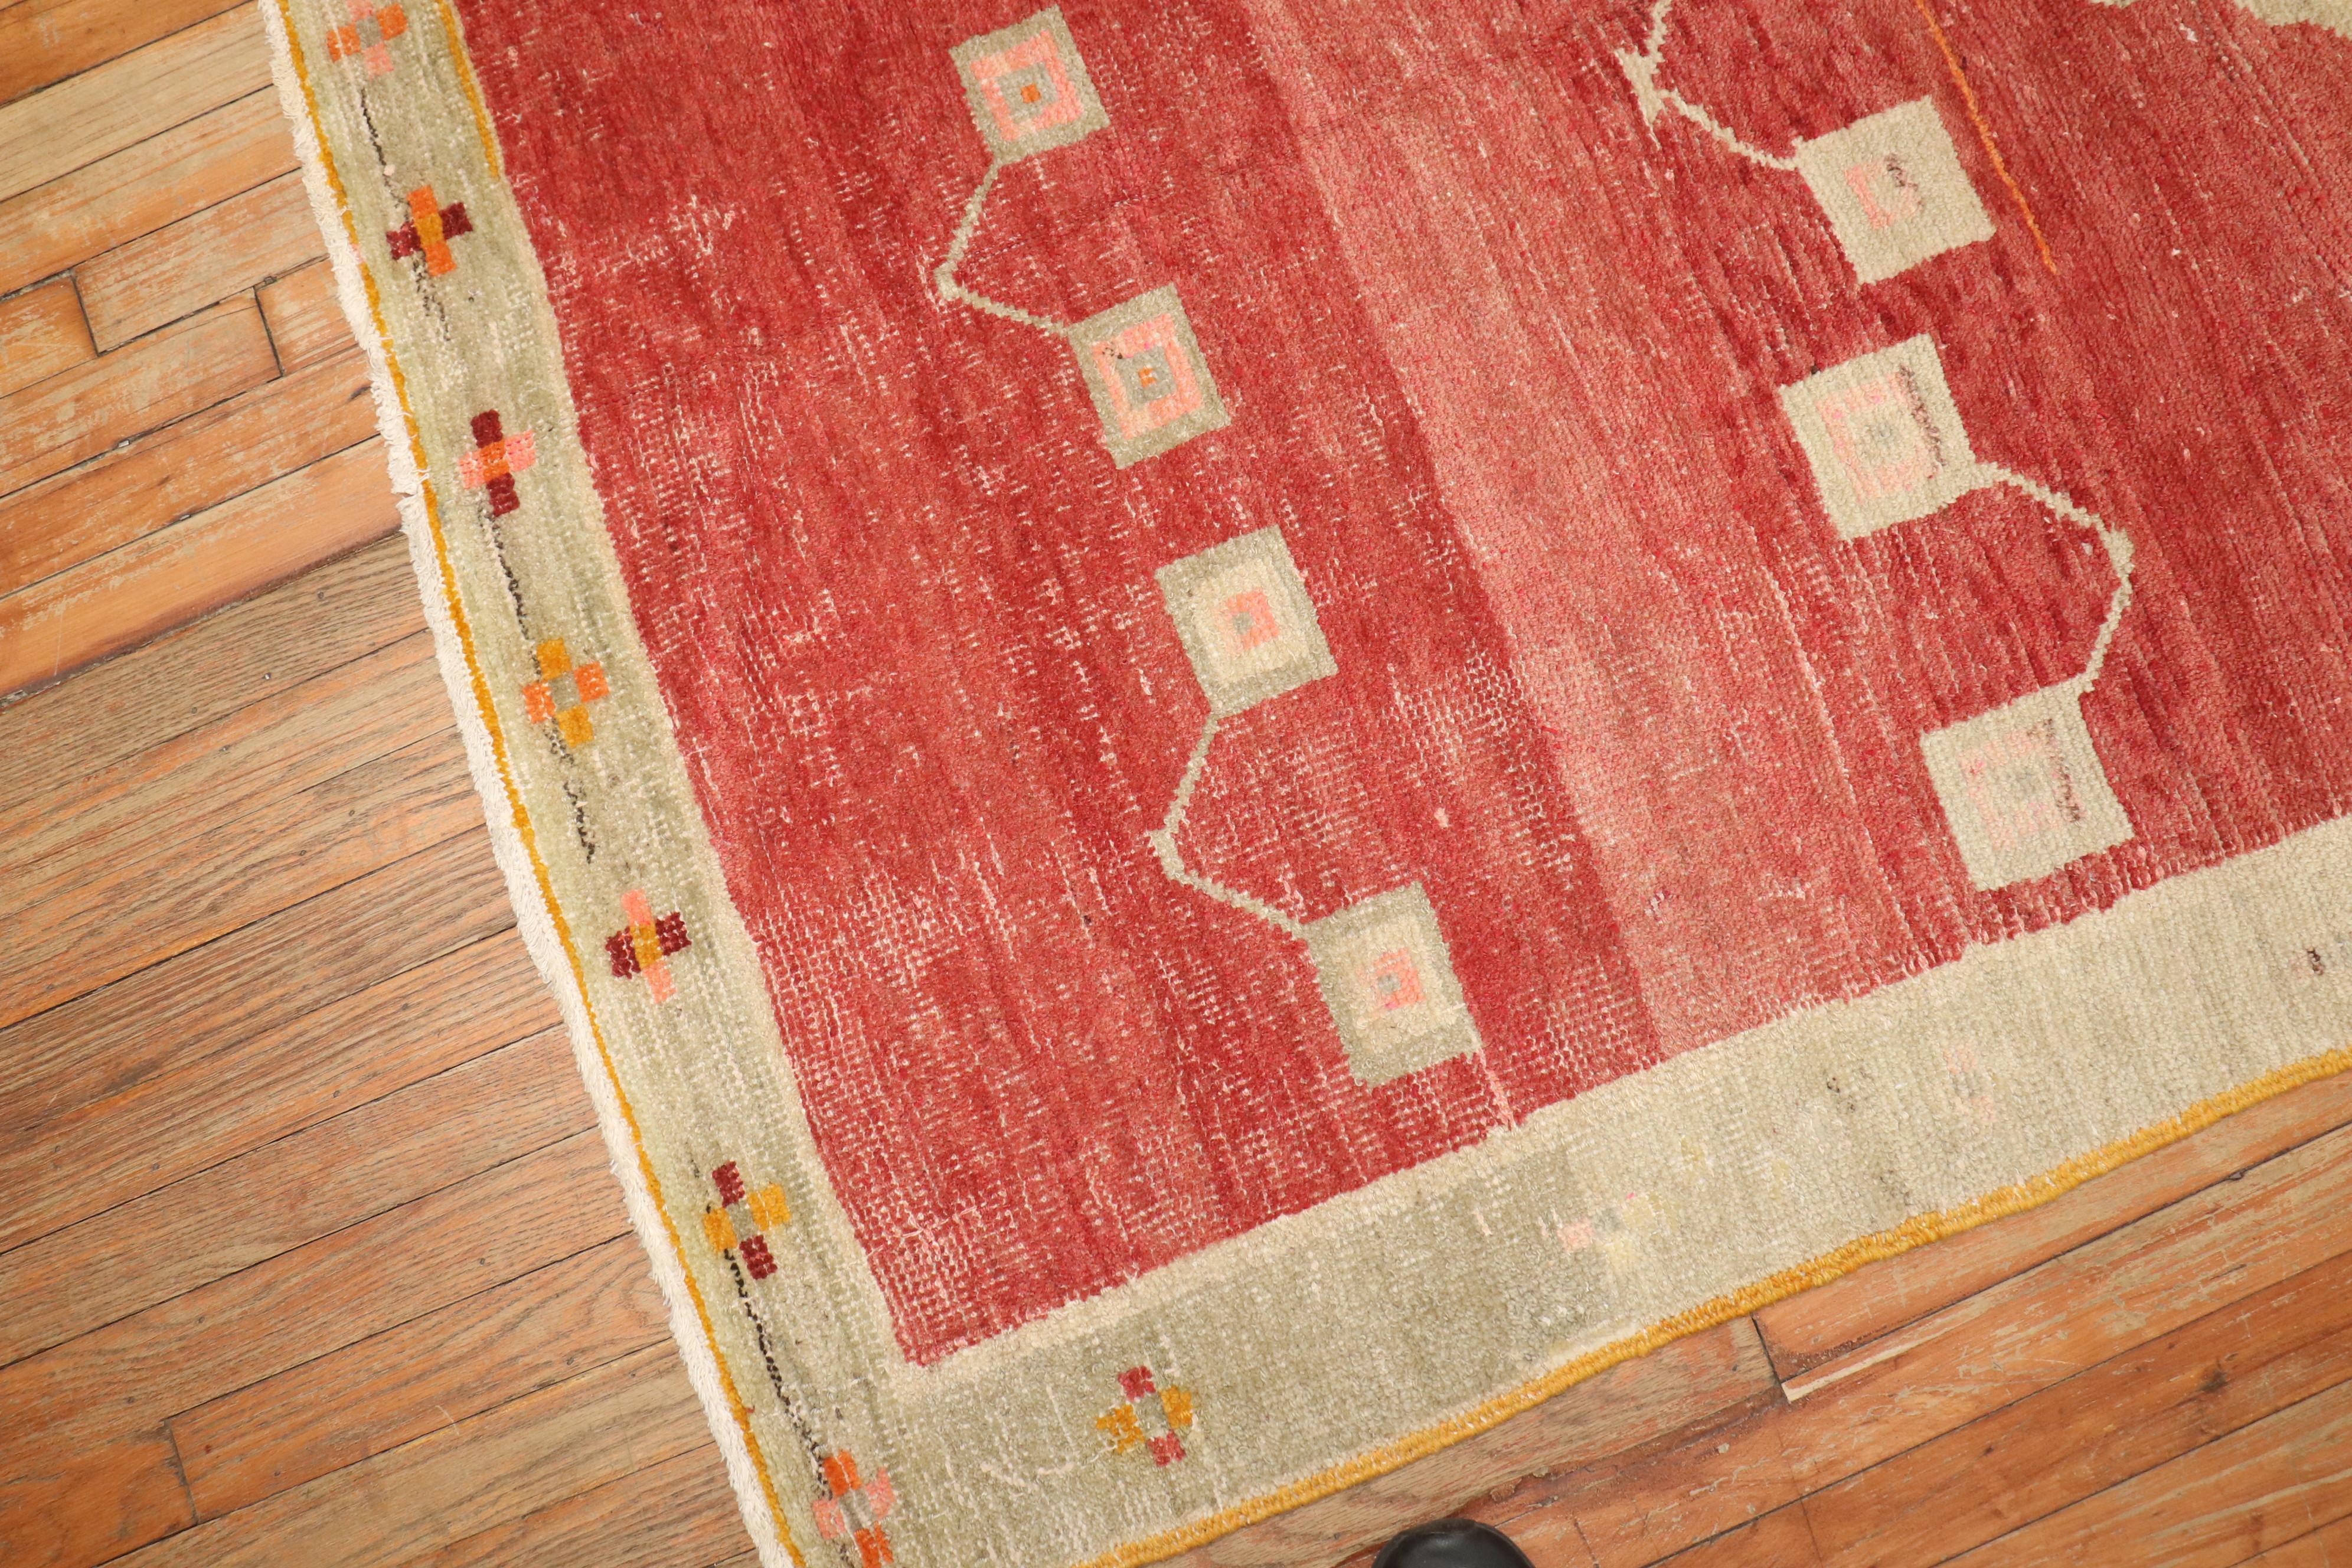 An abstract midcentury Turkish Anatolian rug with a brick red field with accents in green and pink.

Size: 4'6” x 7'2”

Turkish carpets and rugs, whether hand knotted or flat-woven, are among the most well-known and established handcrafted art